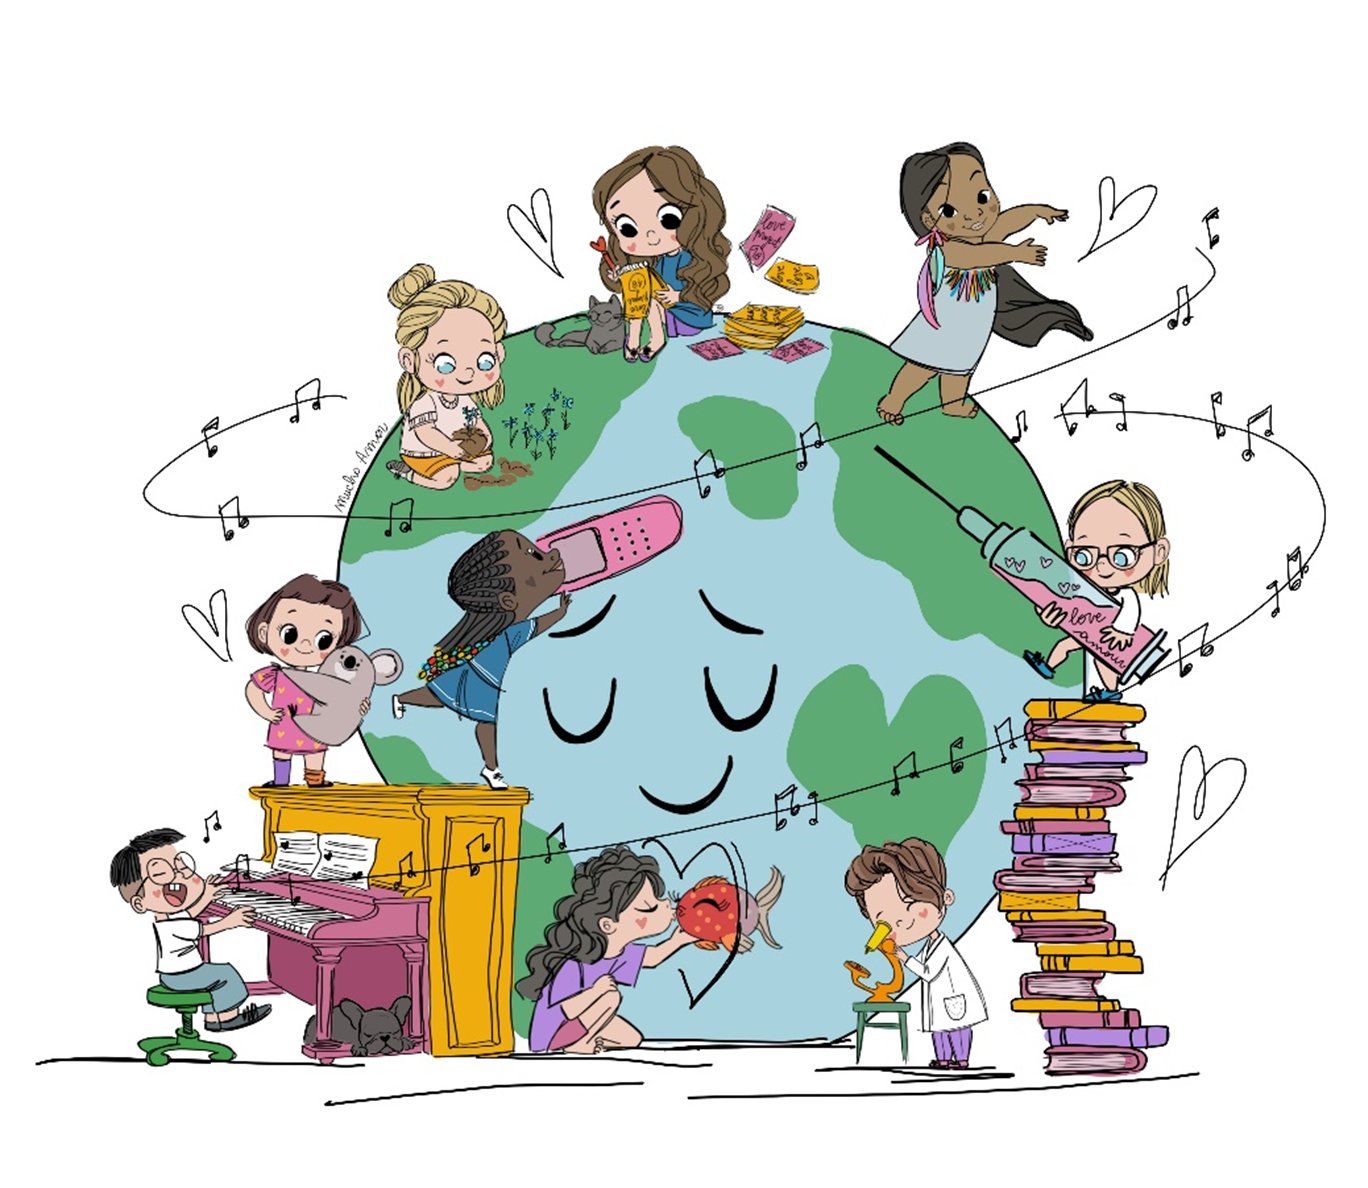 "Amiamoci" (Let's love each other) by Valentina Russo, depicting a cartoon globe with children engaged in various cultural and scientific activities.